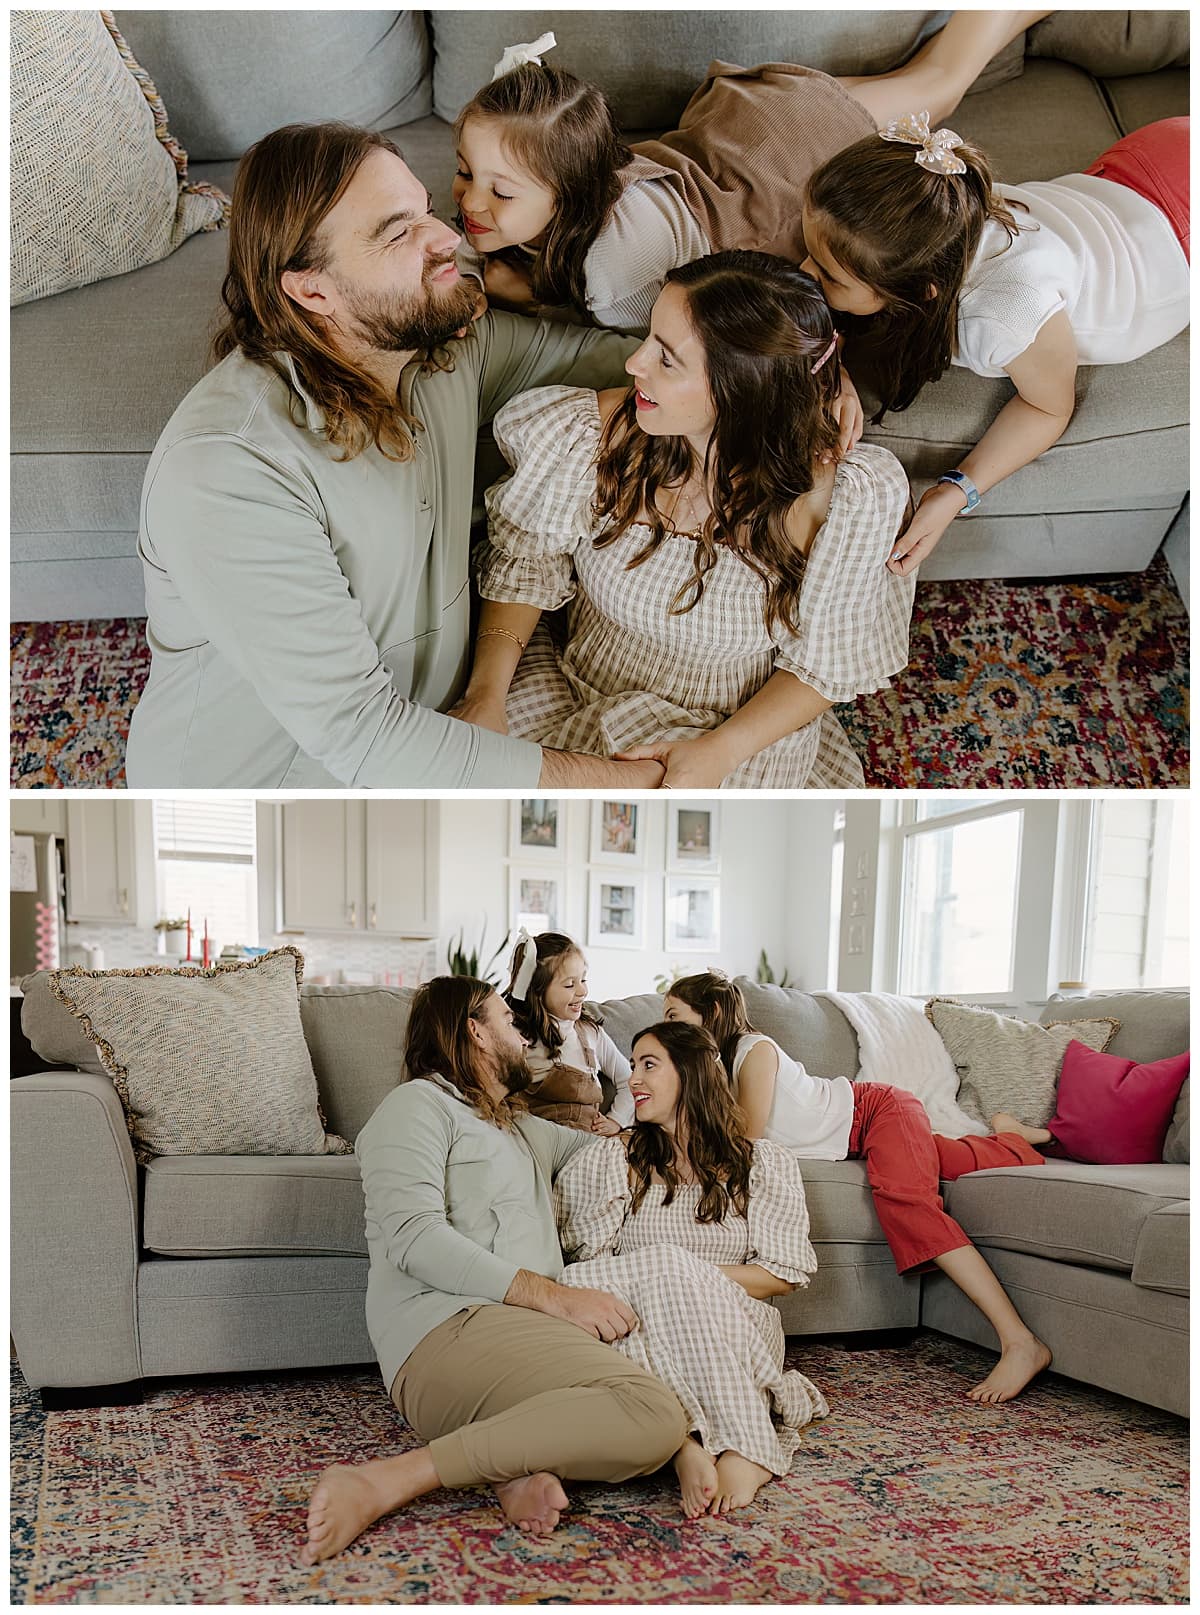 Family cuddle together on the couch for Austin Lifestyle Photographer